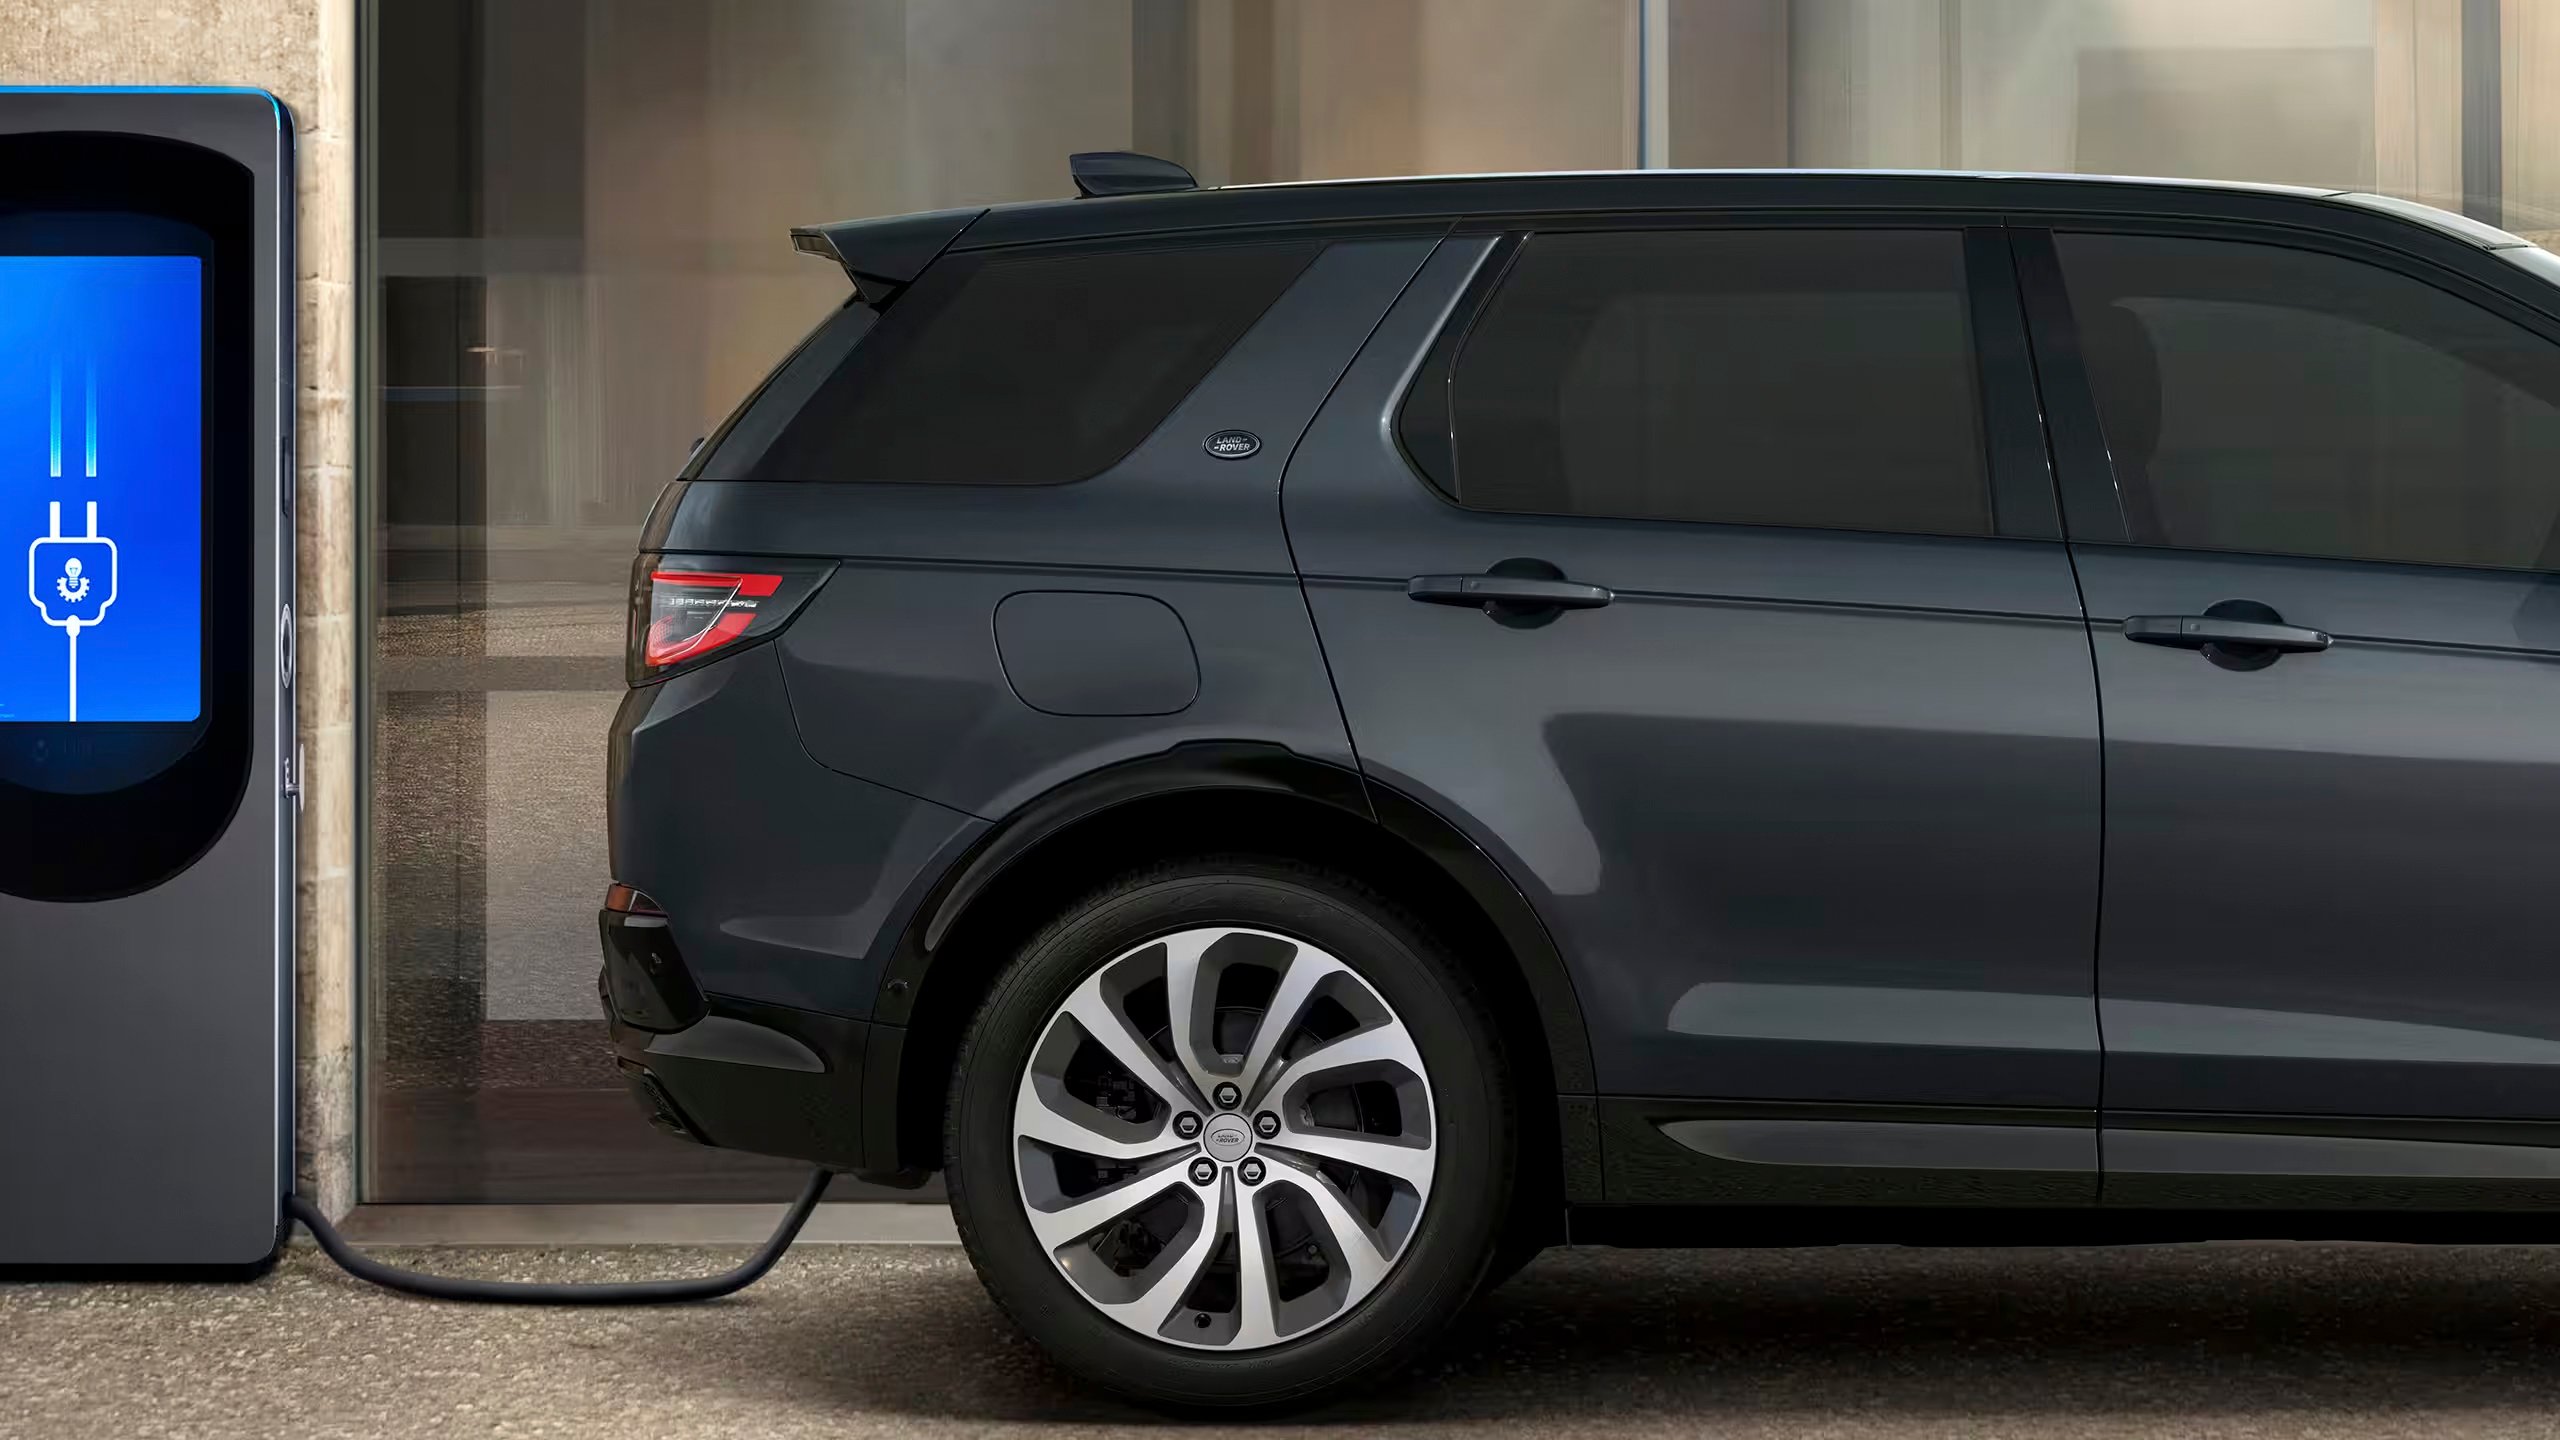 DISCOVERY SPORT ELECTRIC HYBRID